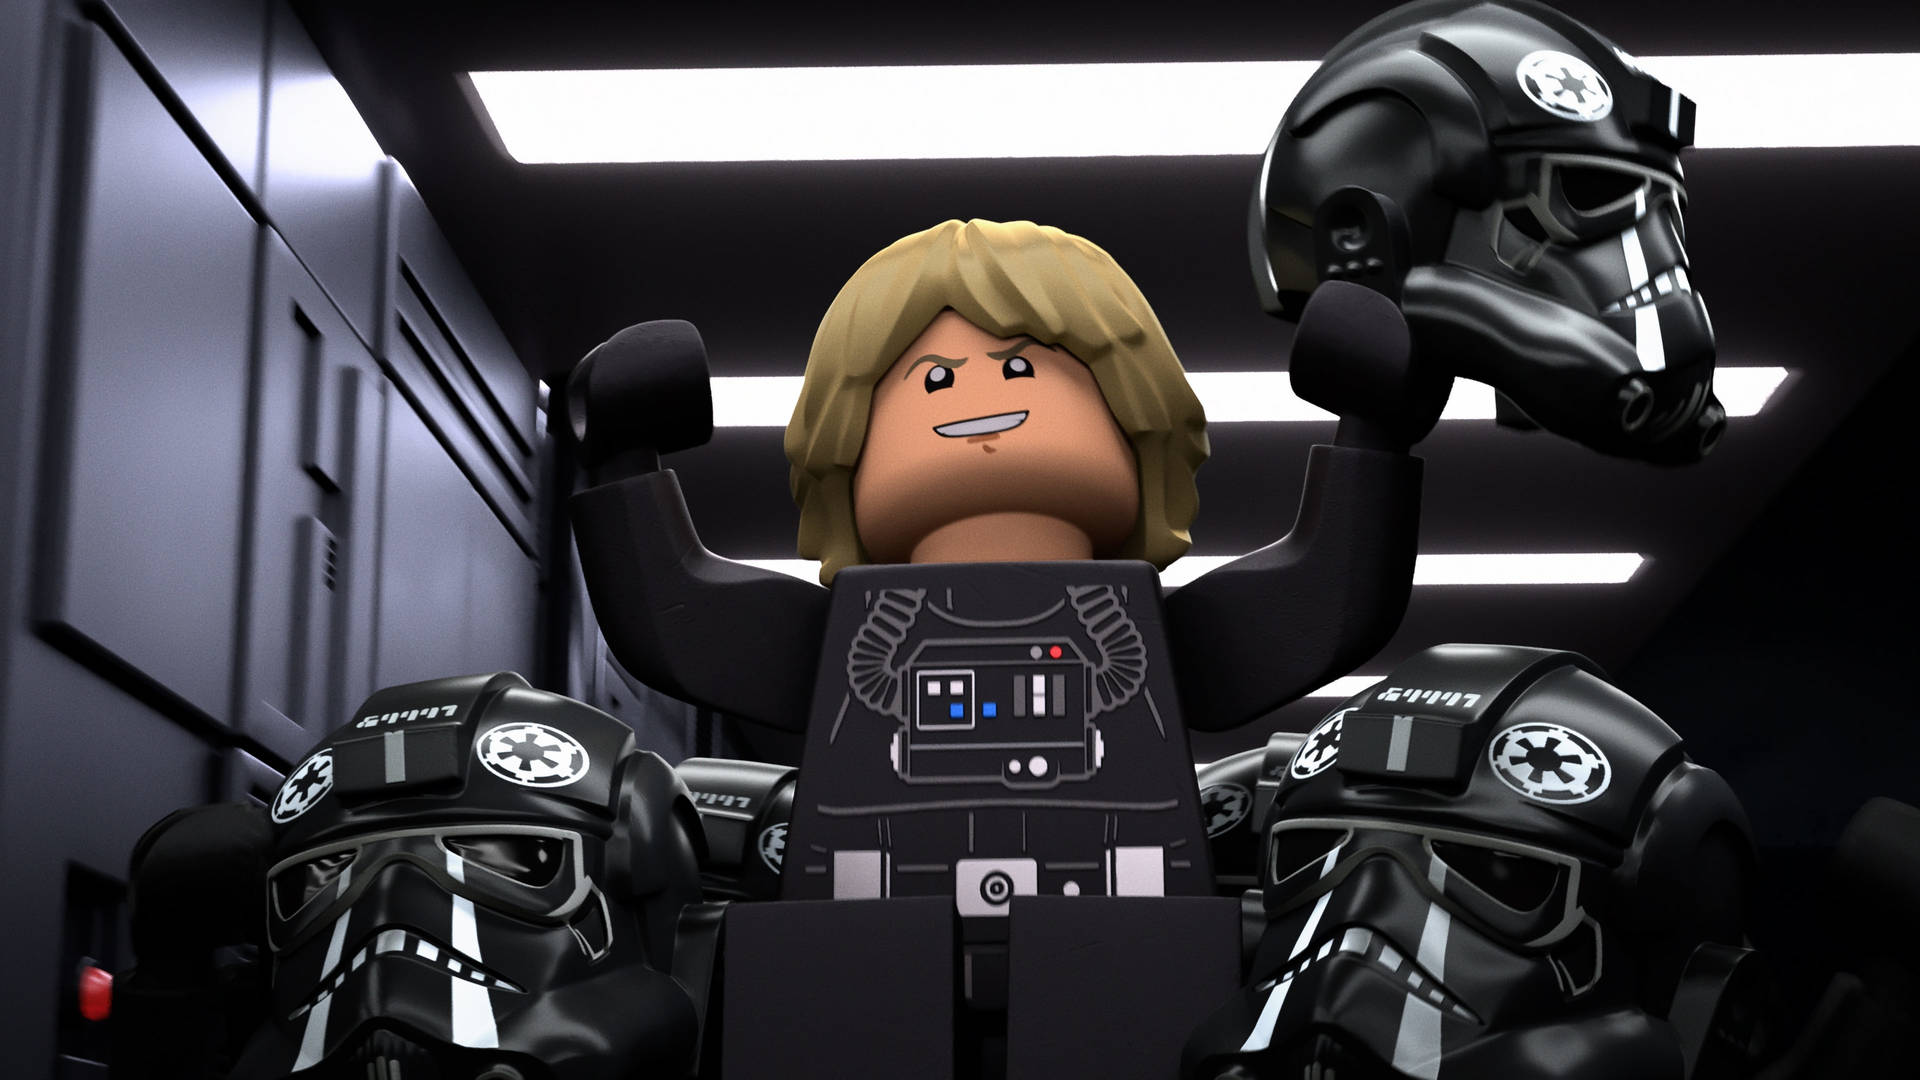 Join the Legos on the epic journey of Star Wars Wallpaper